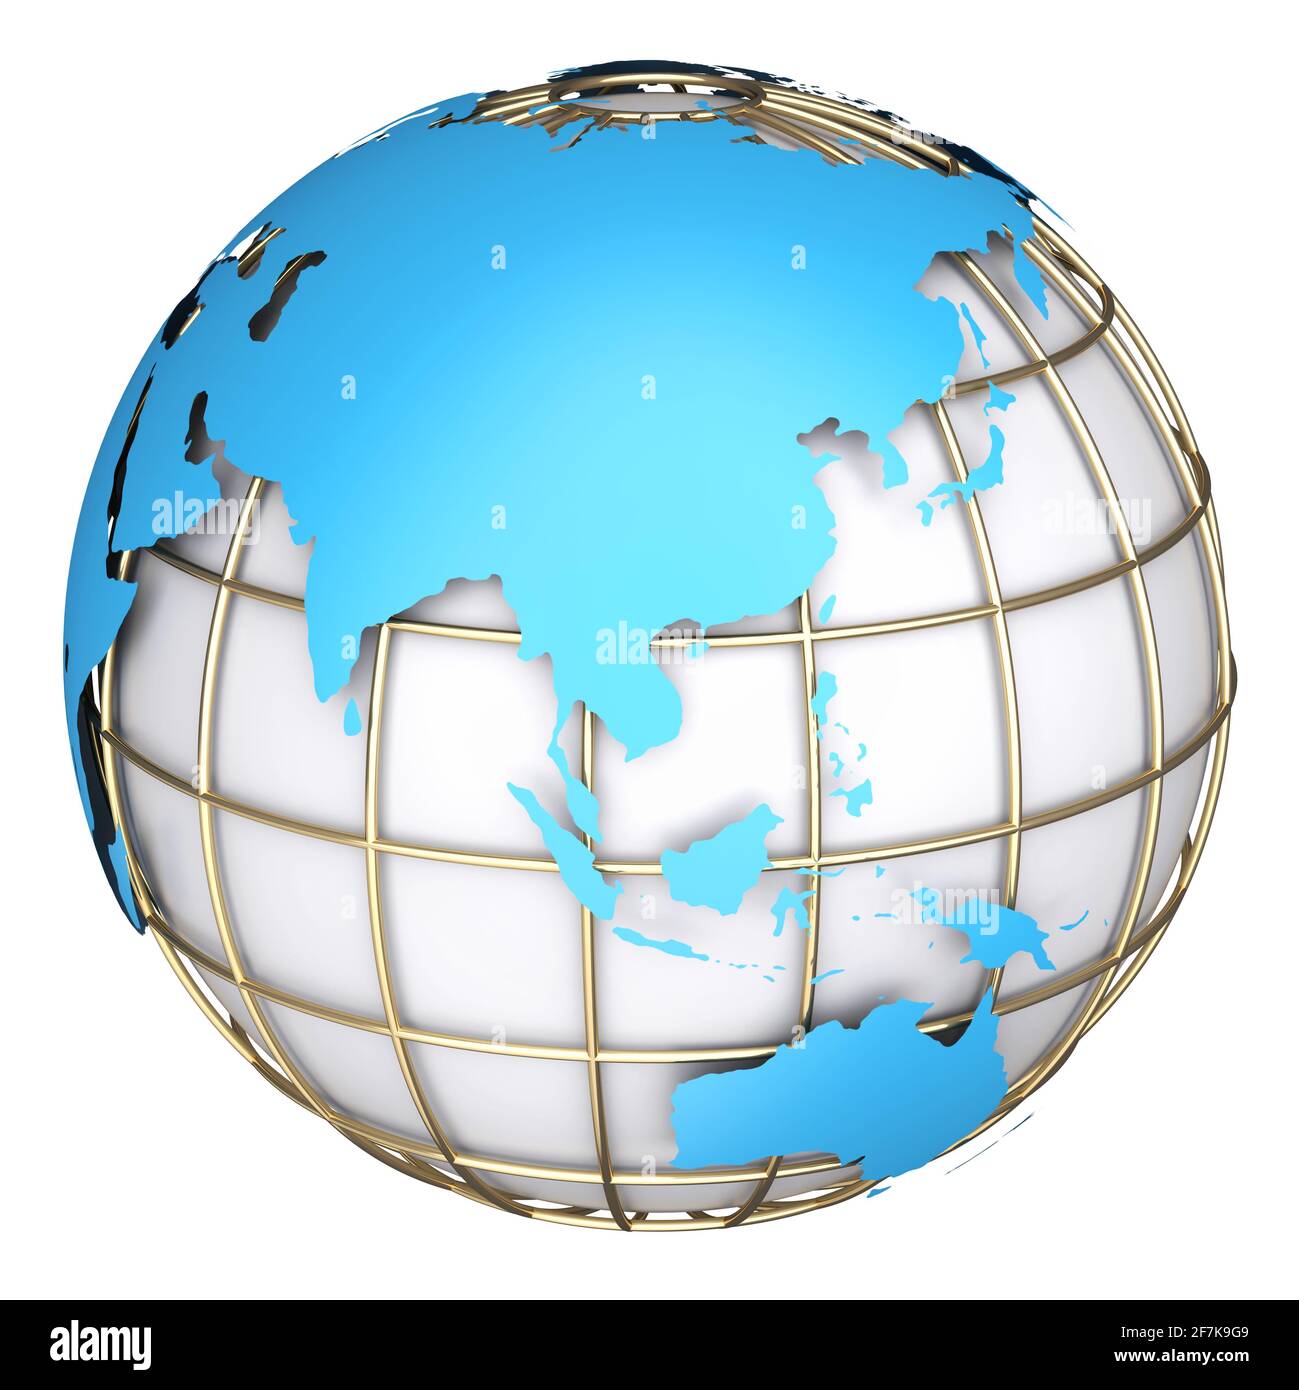 Earth world map.Australia and Asia on a planet globe. 3d illustration Stock Photo